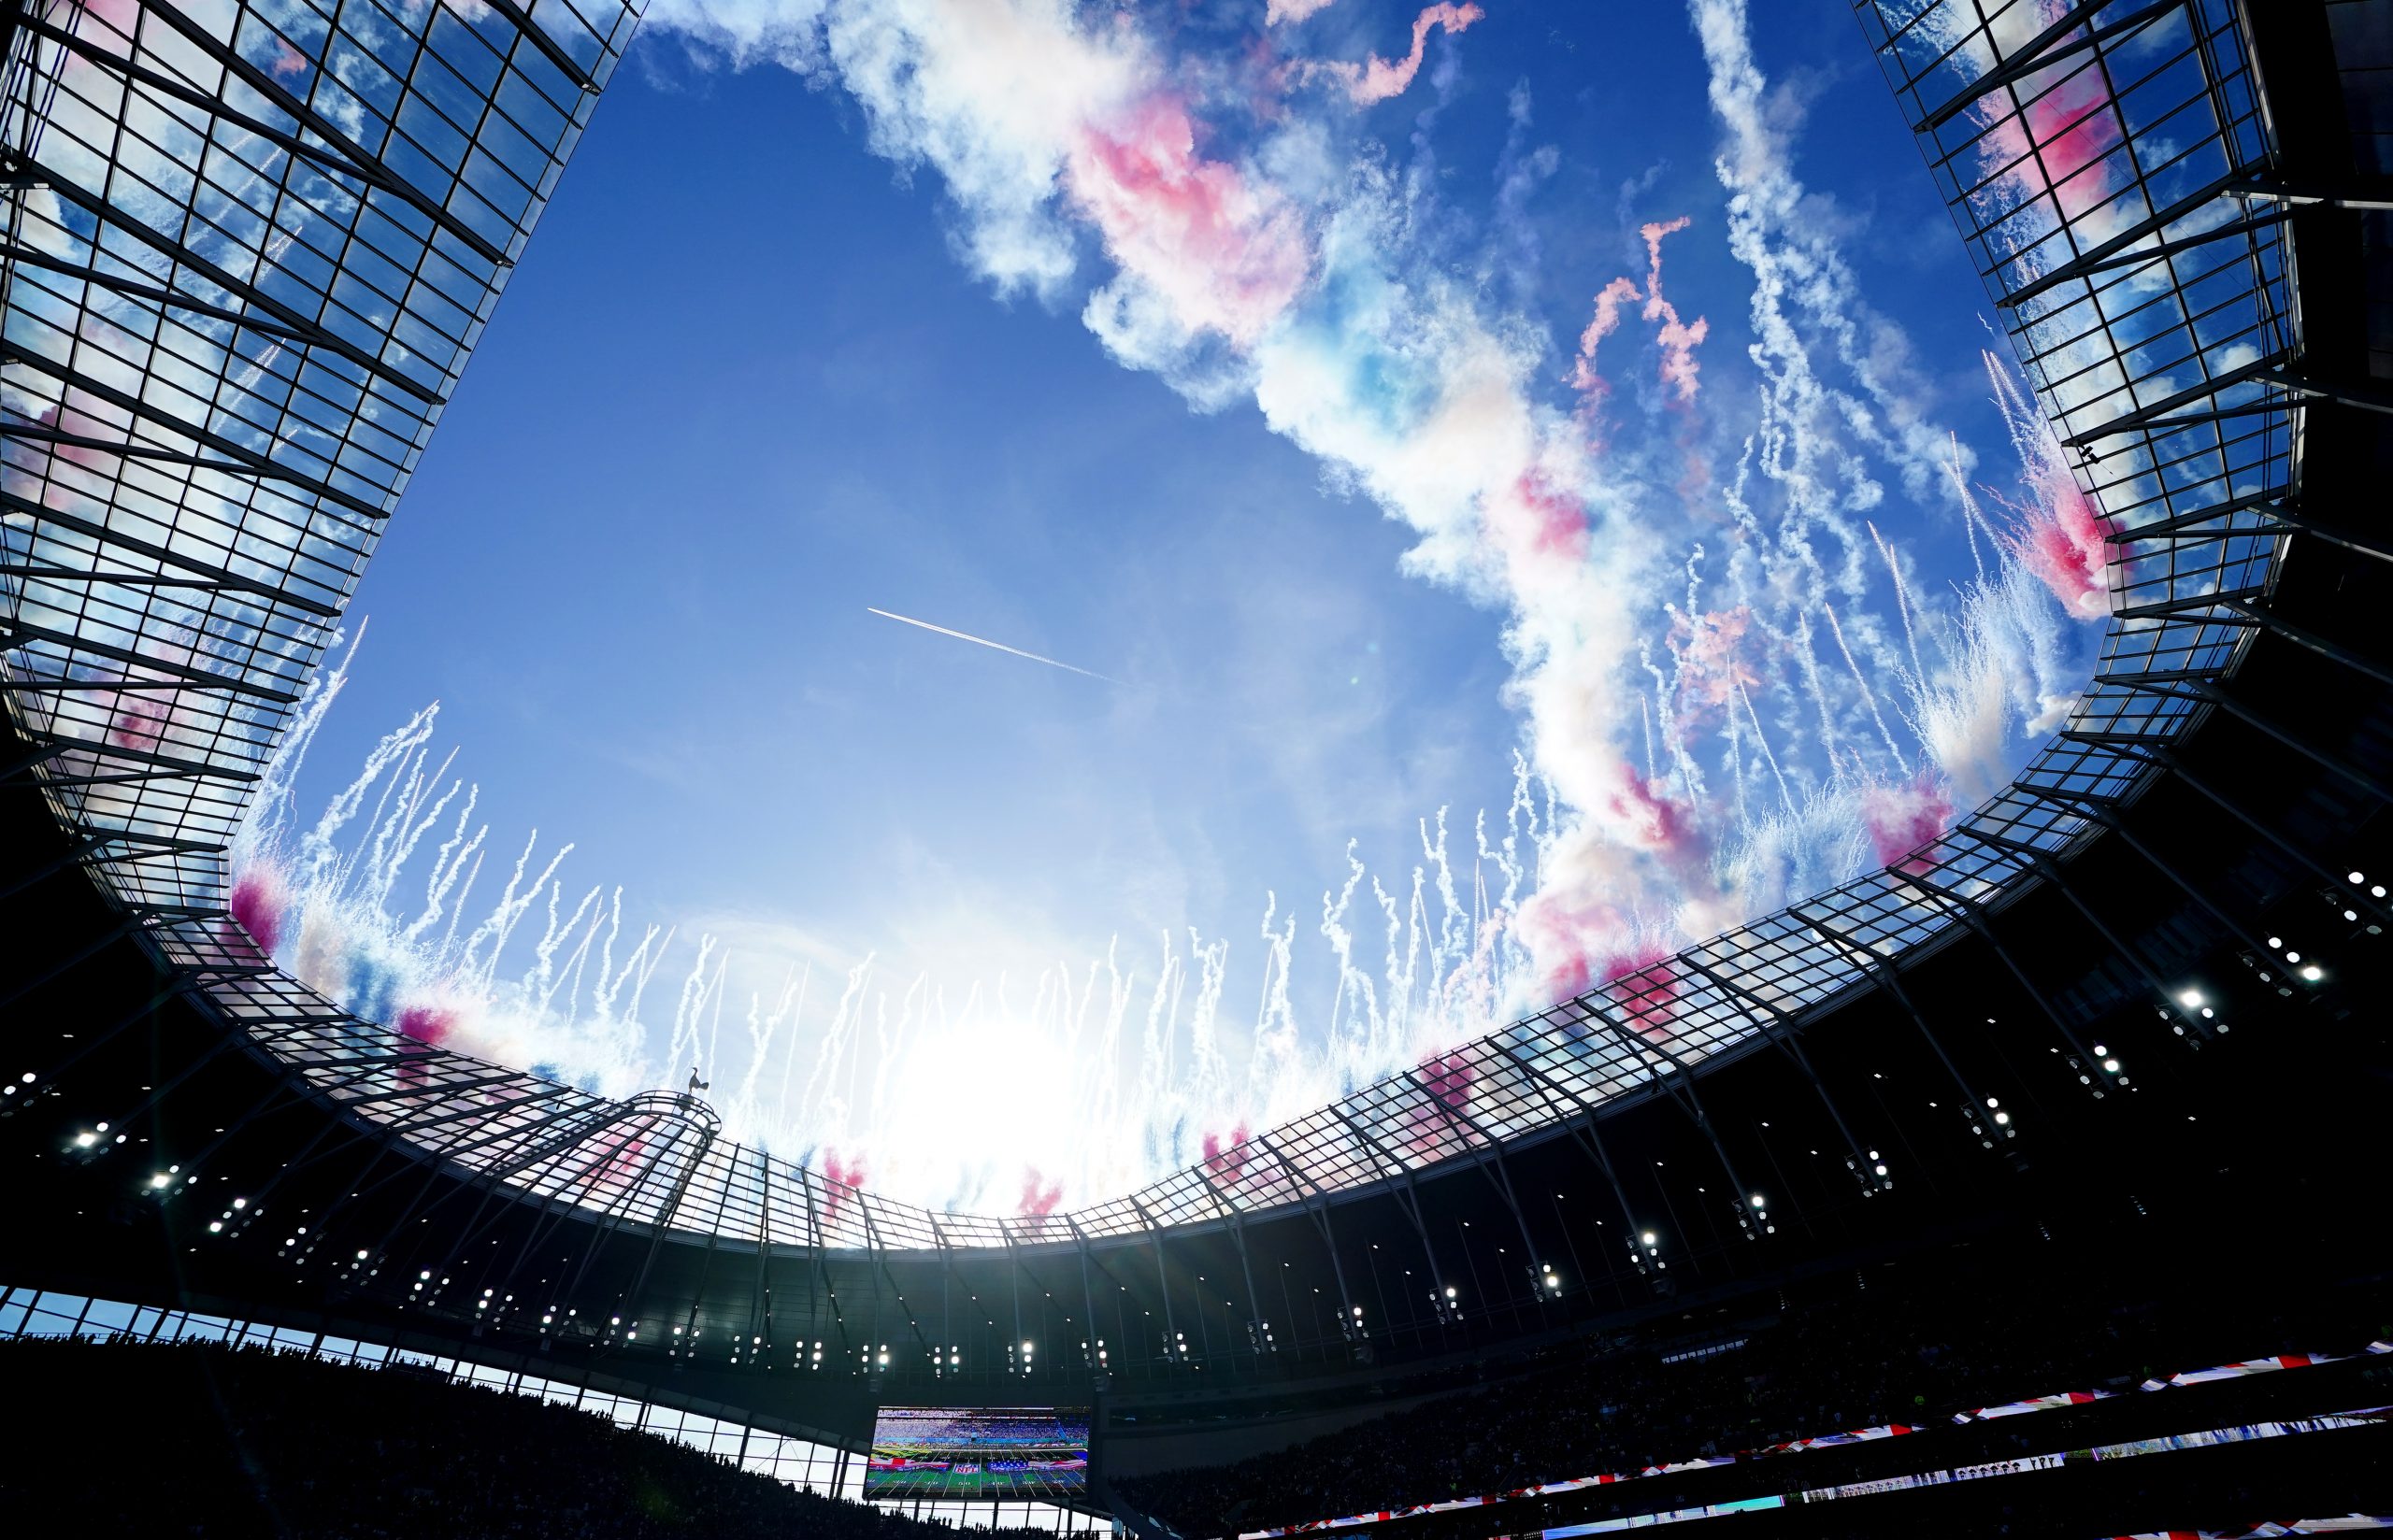 Fireworks are set off above the stadium prior to the NFL international match at the Tottenham Hotsp...